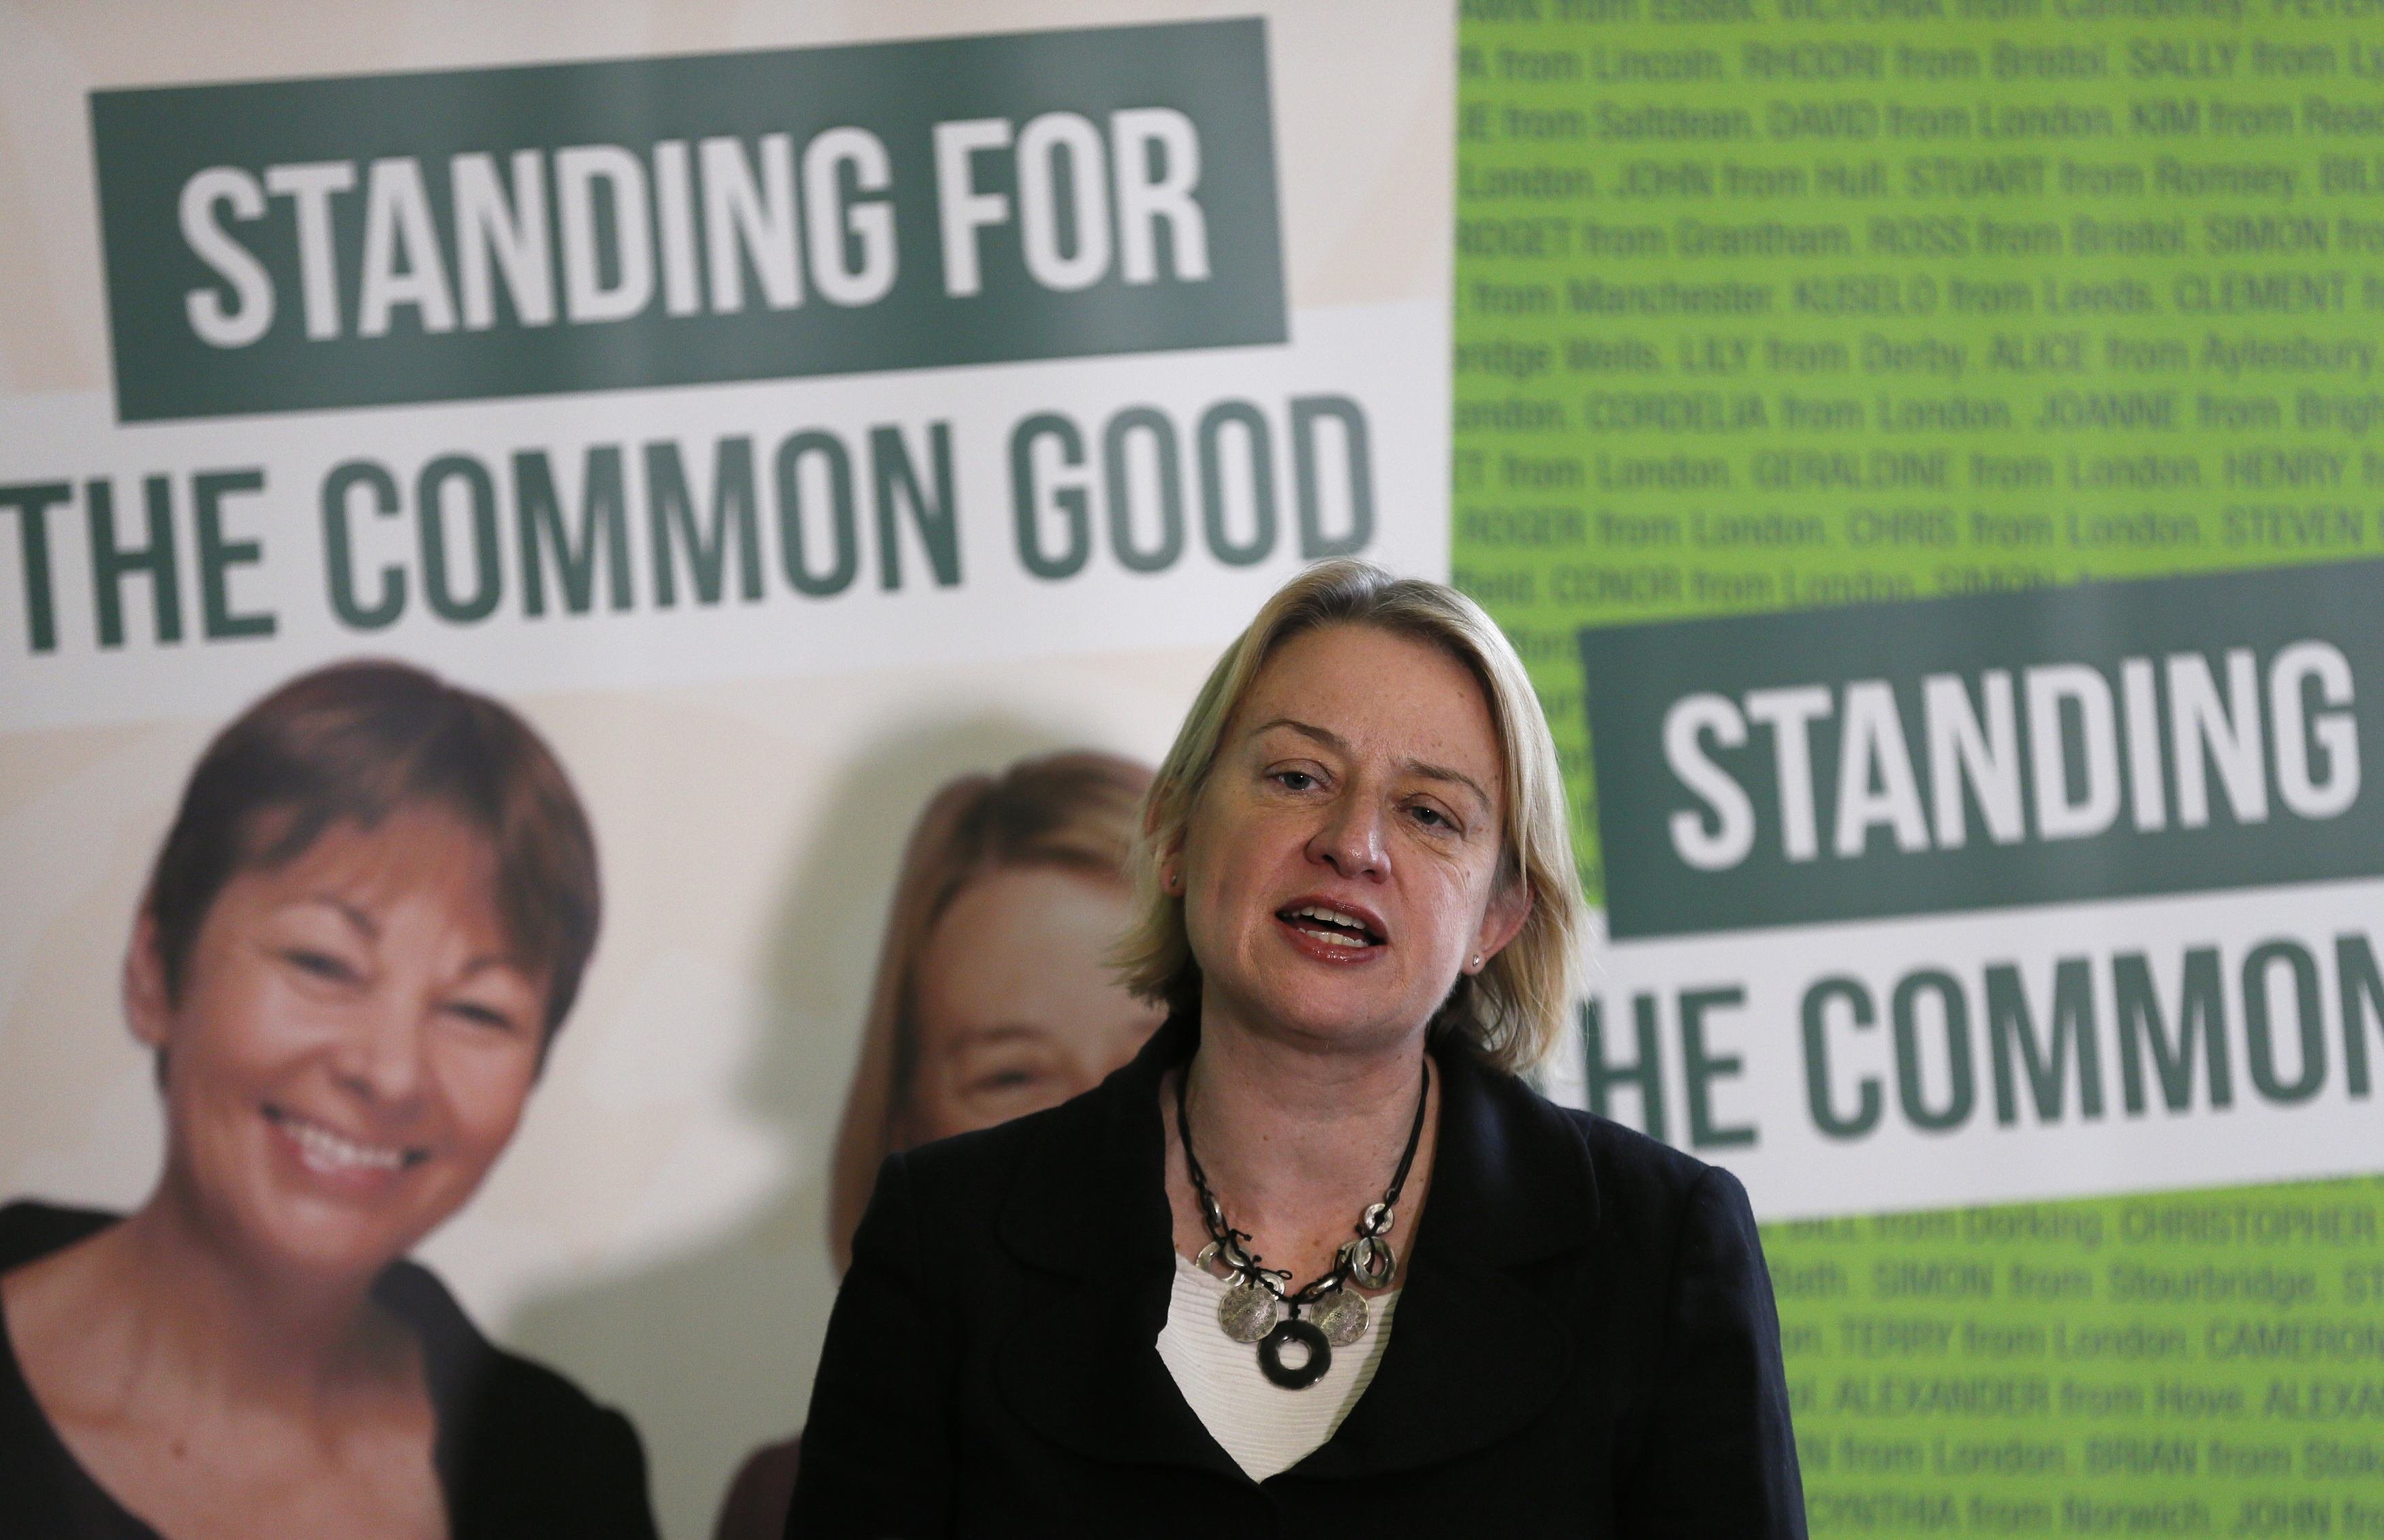 Britain's Green Party leader Natalie Bennett speaks during the party's general election campaign launch in London on Feb. 24, 2015. (Stefan Wermuth—Reuters)